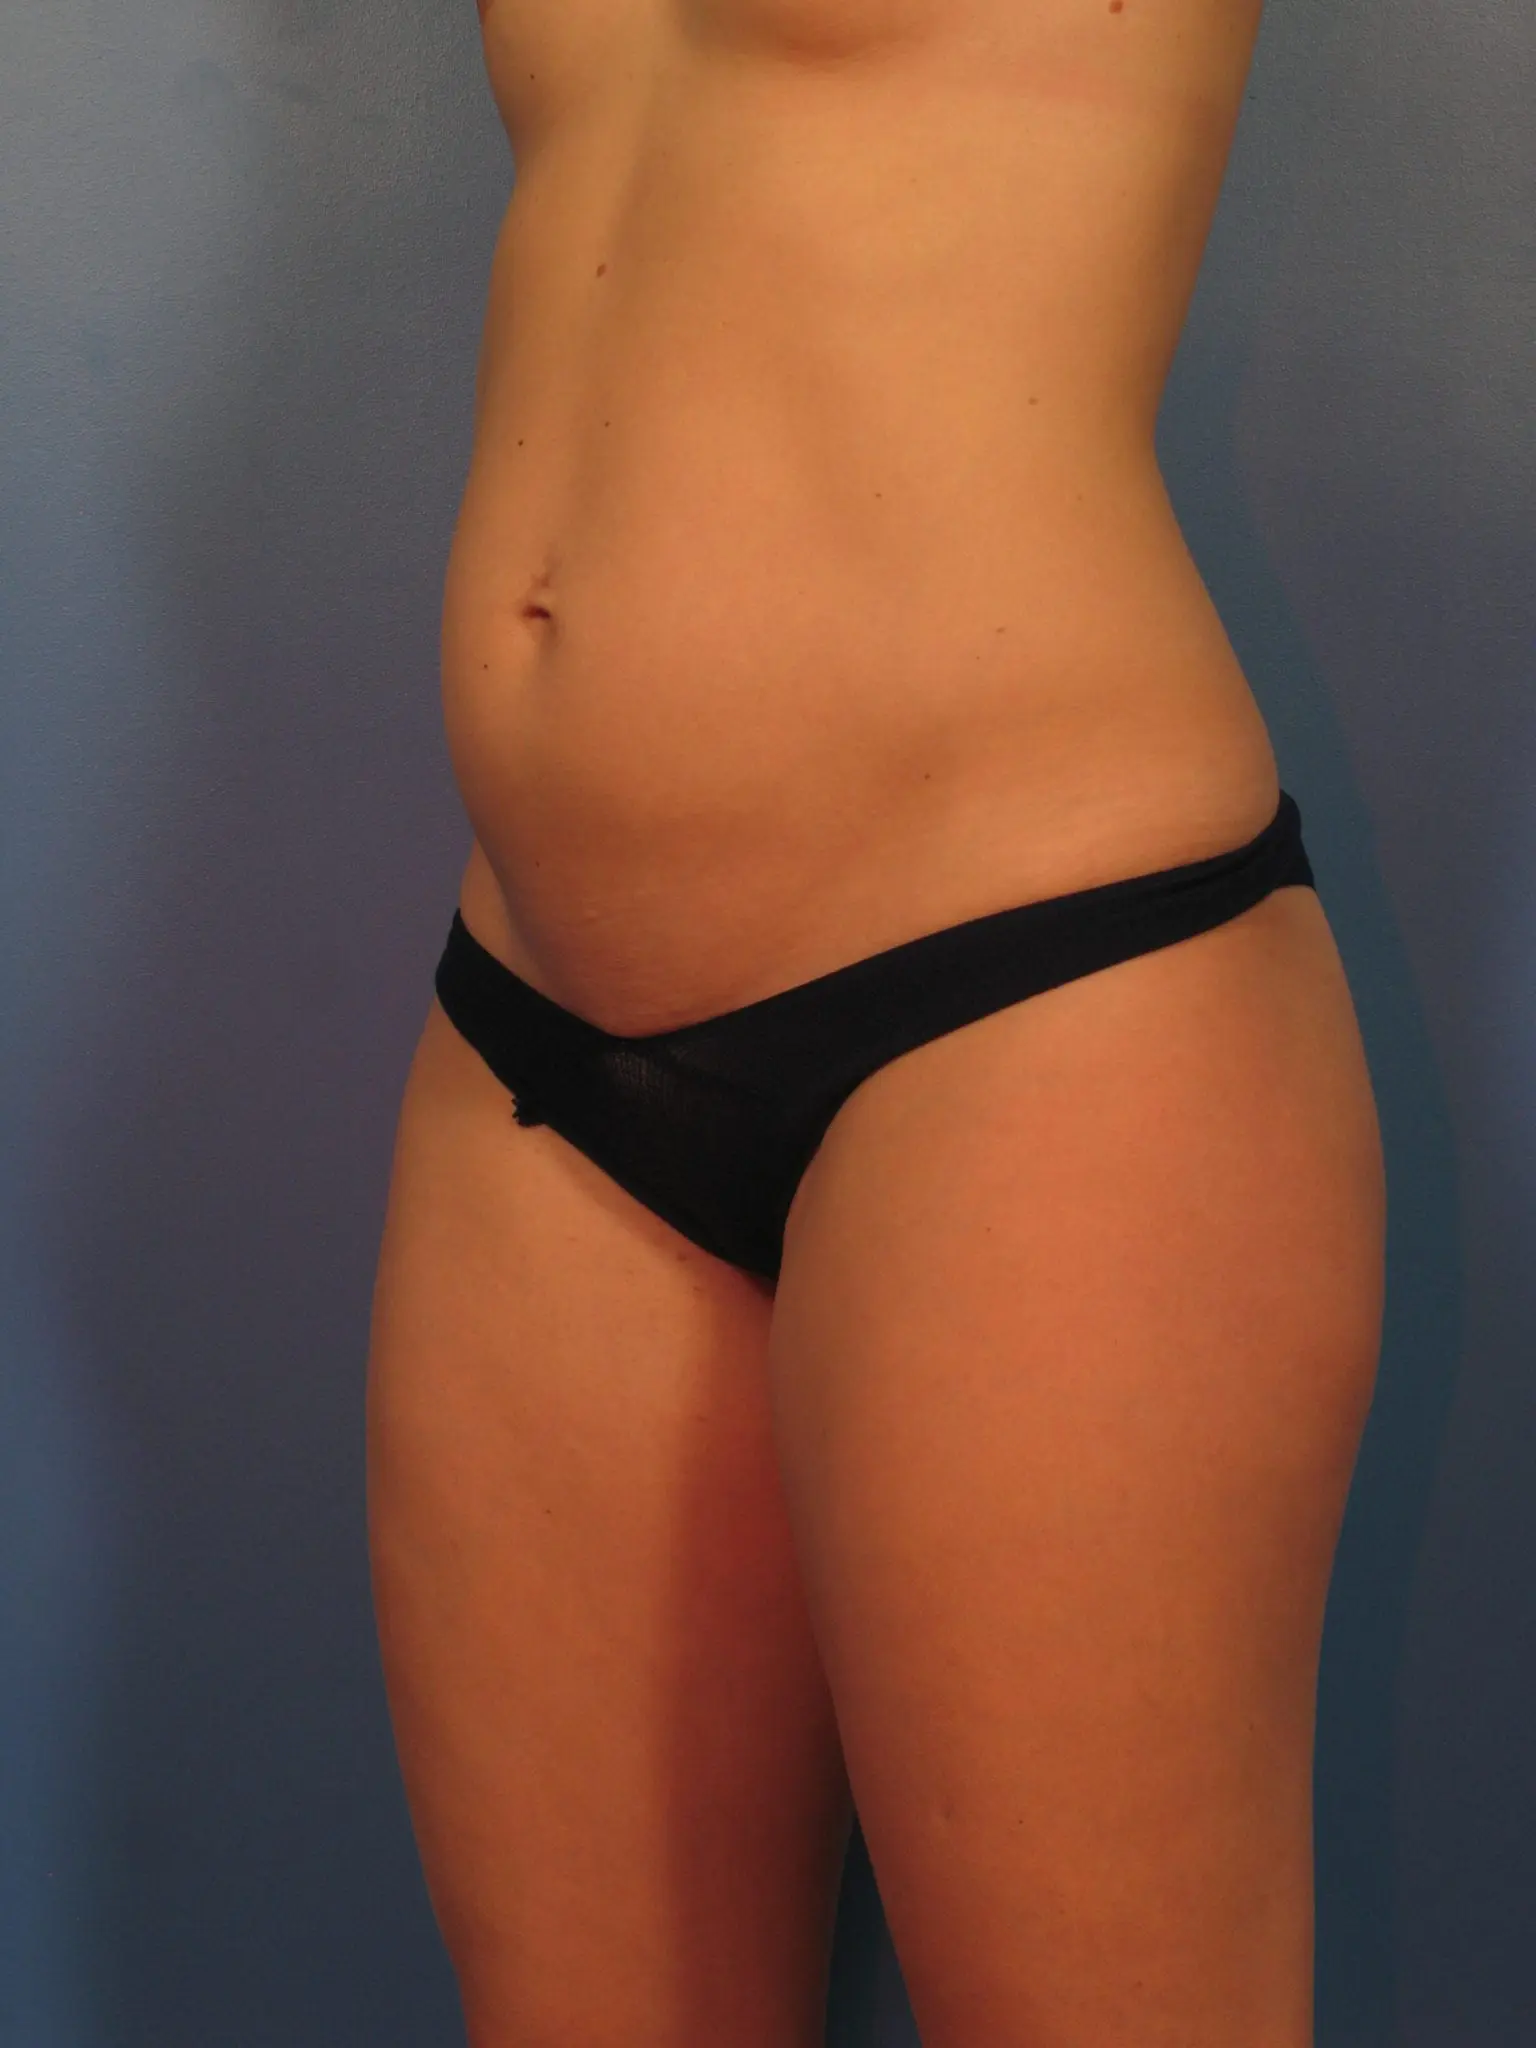 Liposuction - Case 422a - Before